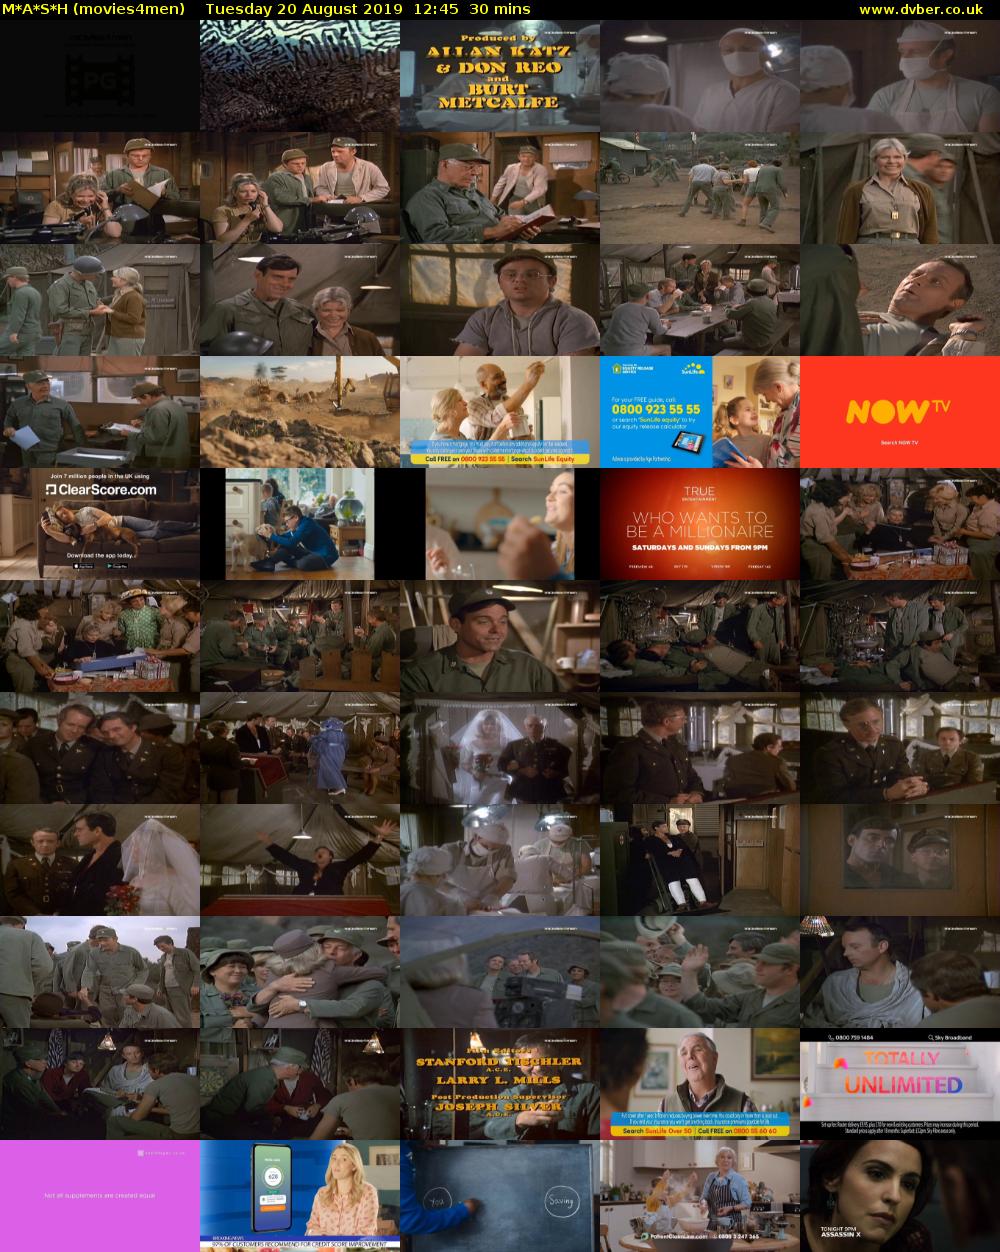 M*A*S*H (movies4men) Tuesday 20 August 2019 12:45 - 13:15